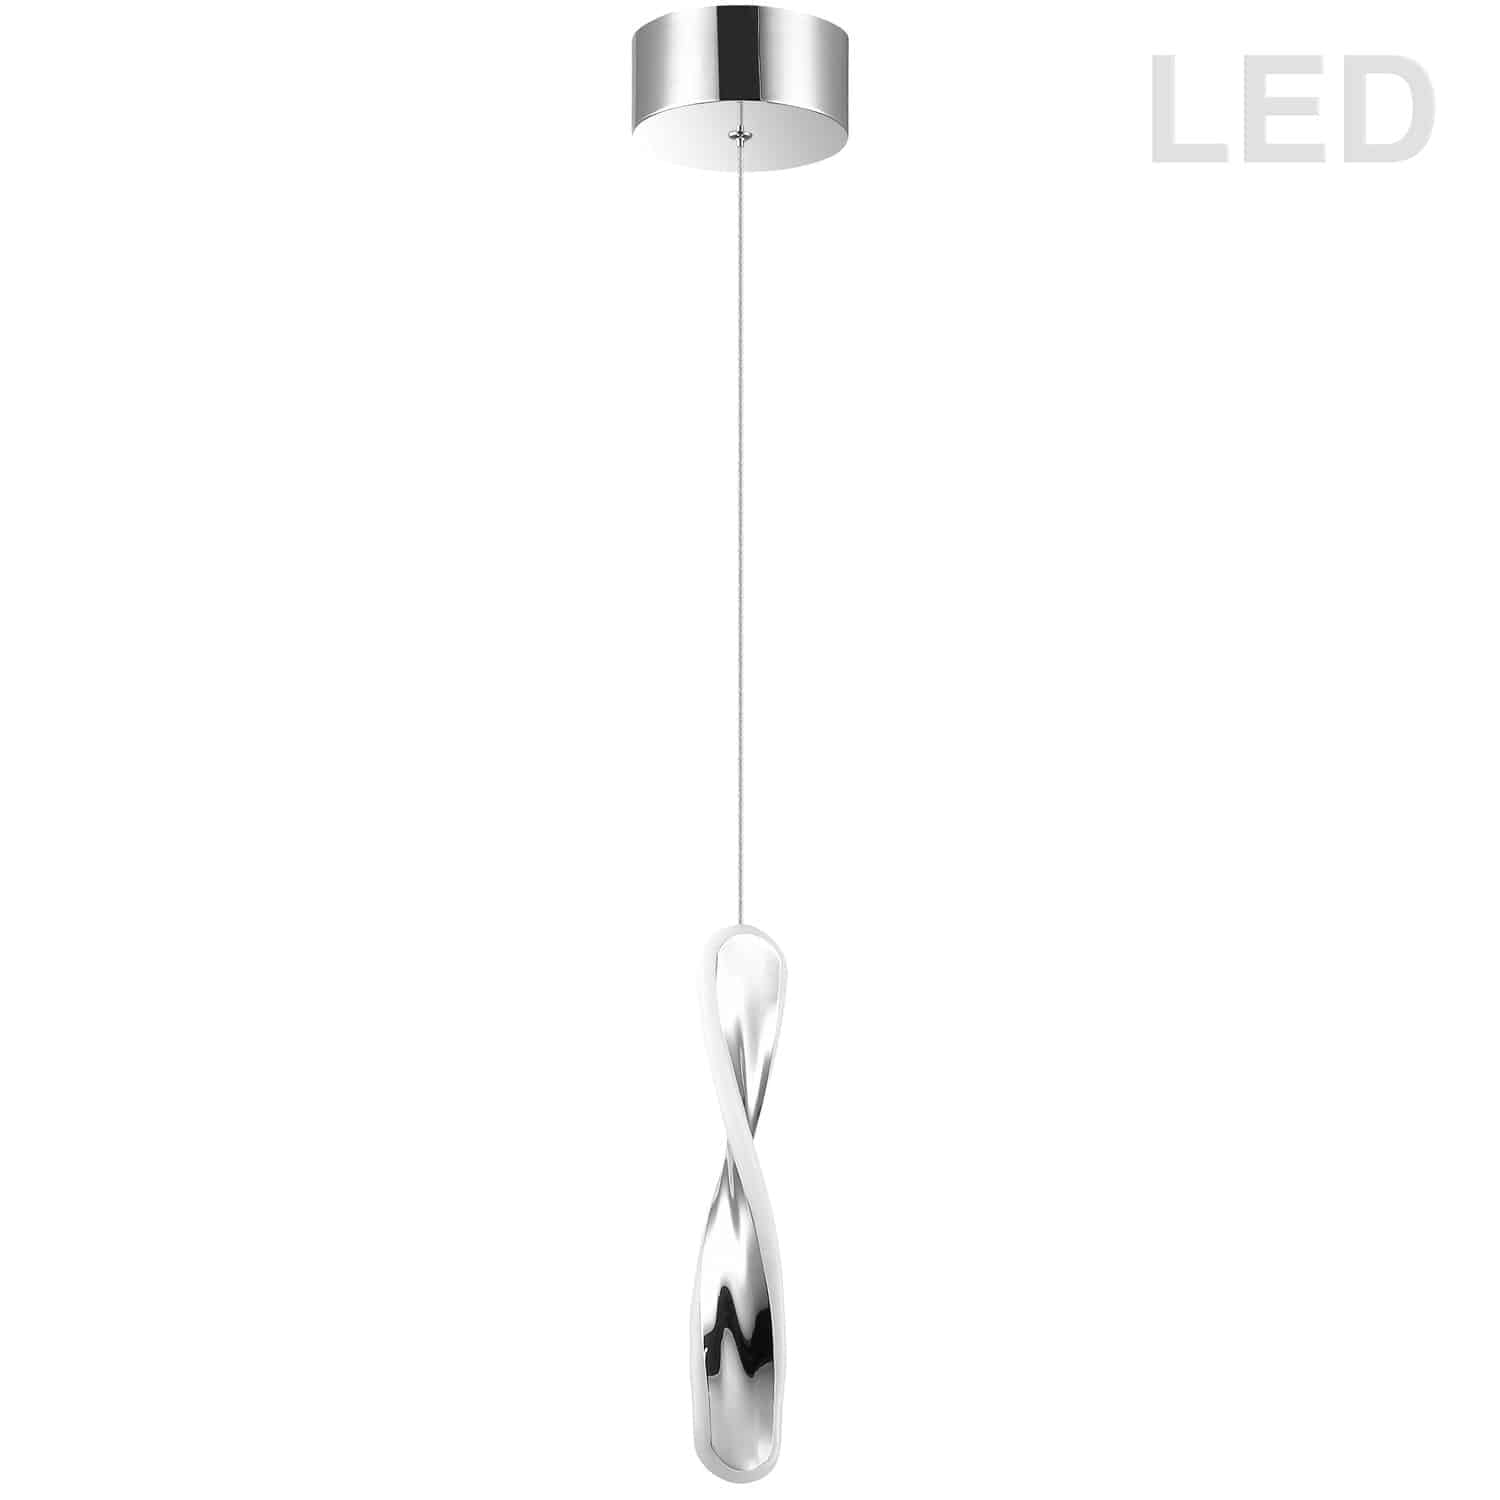 The Single Pendant collection features four unique designs, each built on the appeal of the classic drop design. With variations in form and materials, it's a versatile look with a modest profile that can work in rooms of any size. What begins with a simple metal drop and frame becomes a stylish source of light via designer details. Color variations and different styles of glass create looks that will suit modern and contemporary homes. Single pendant lighting creates a focal point that enhances the furnishing around it in a hallways, kitchen or bedroom.